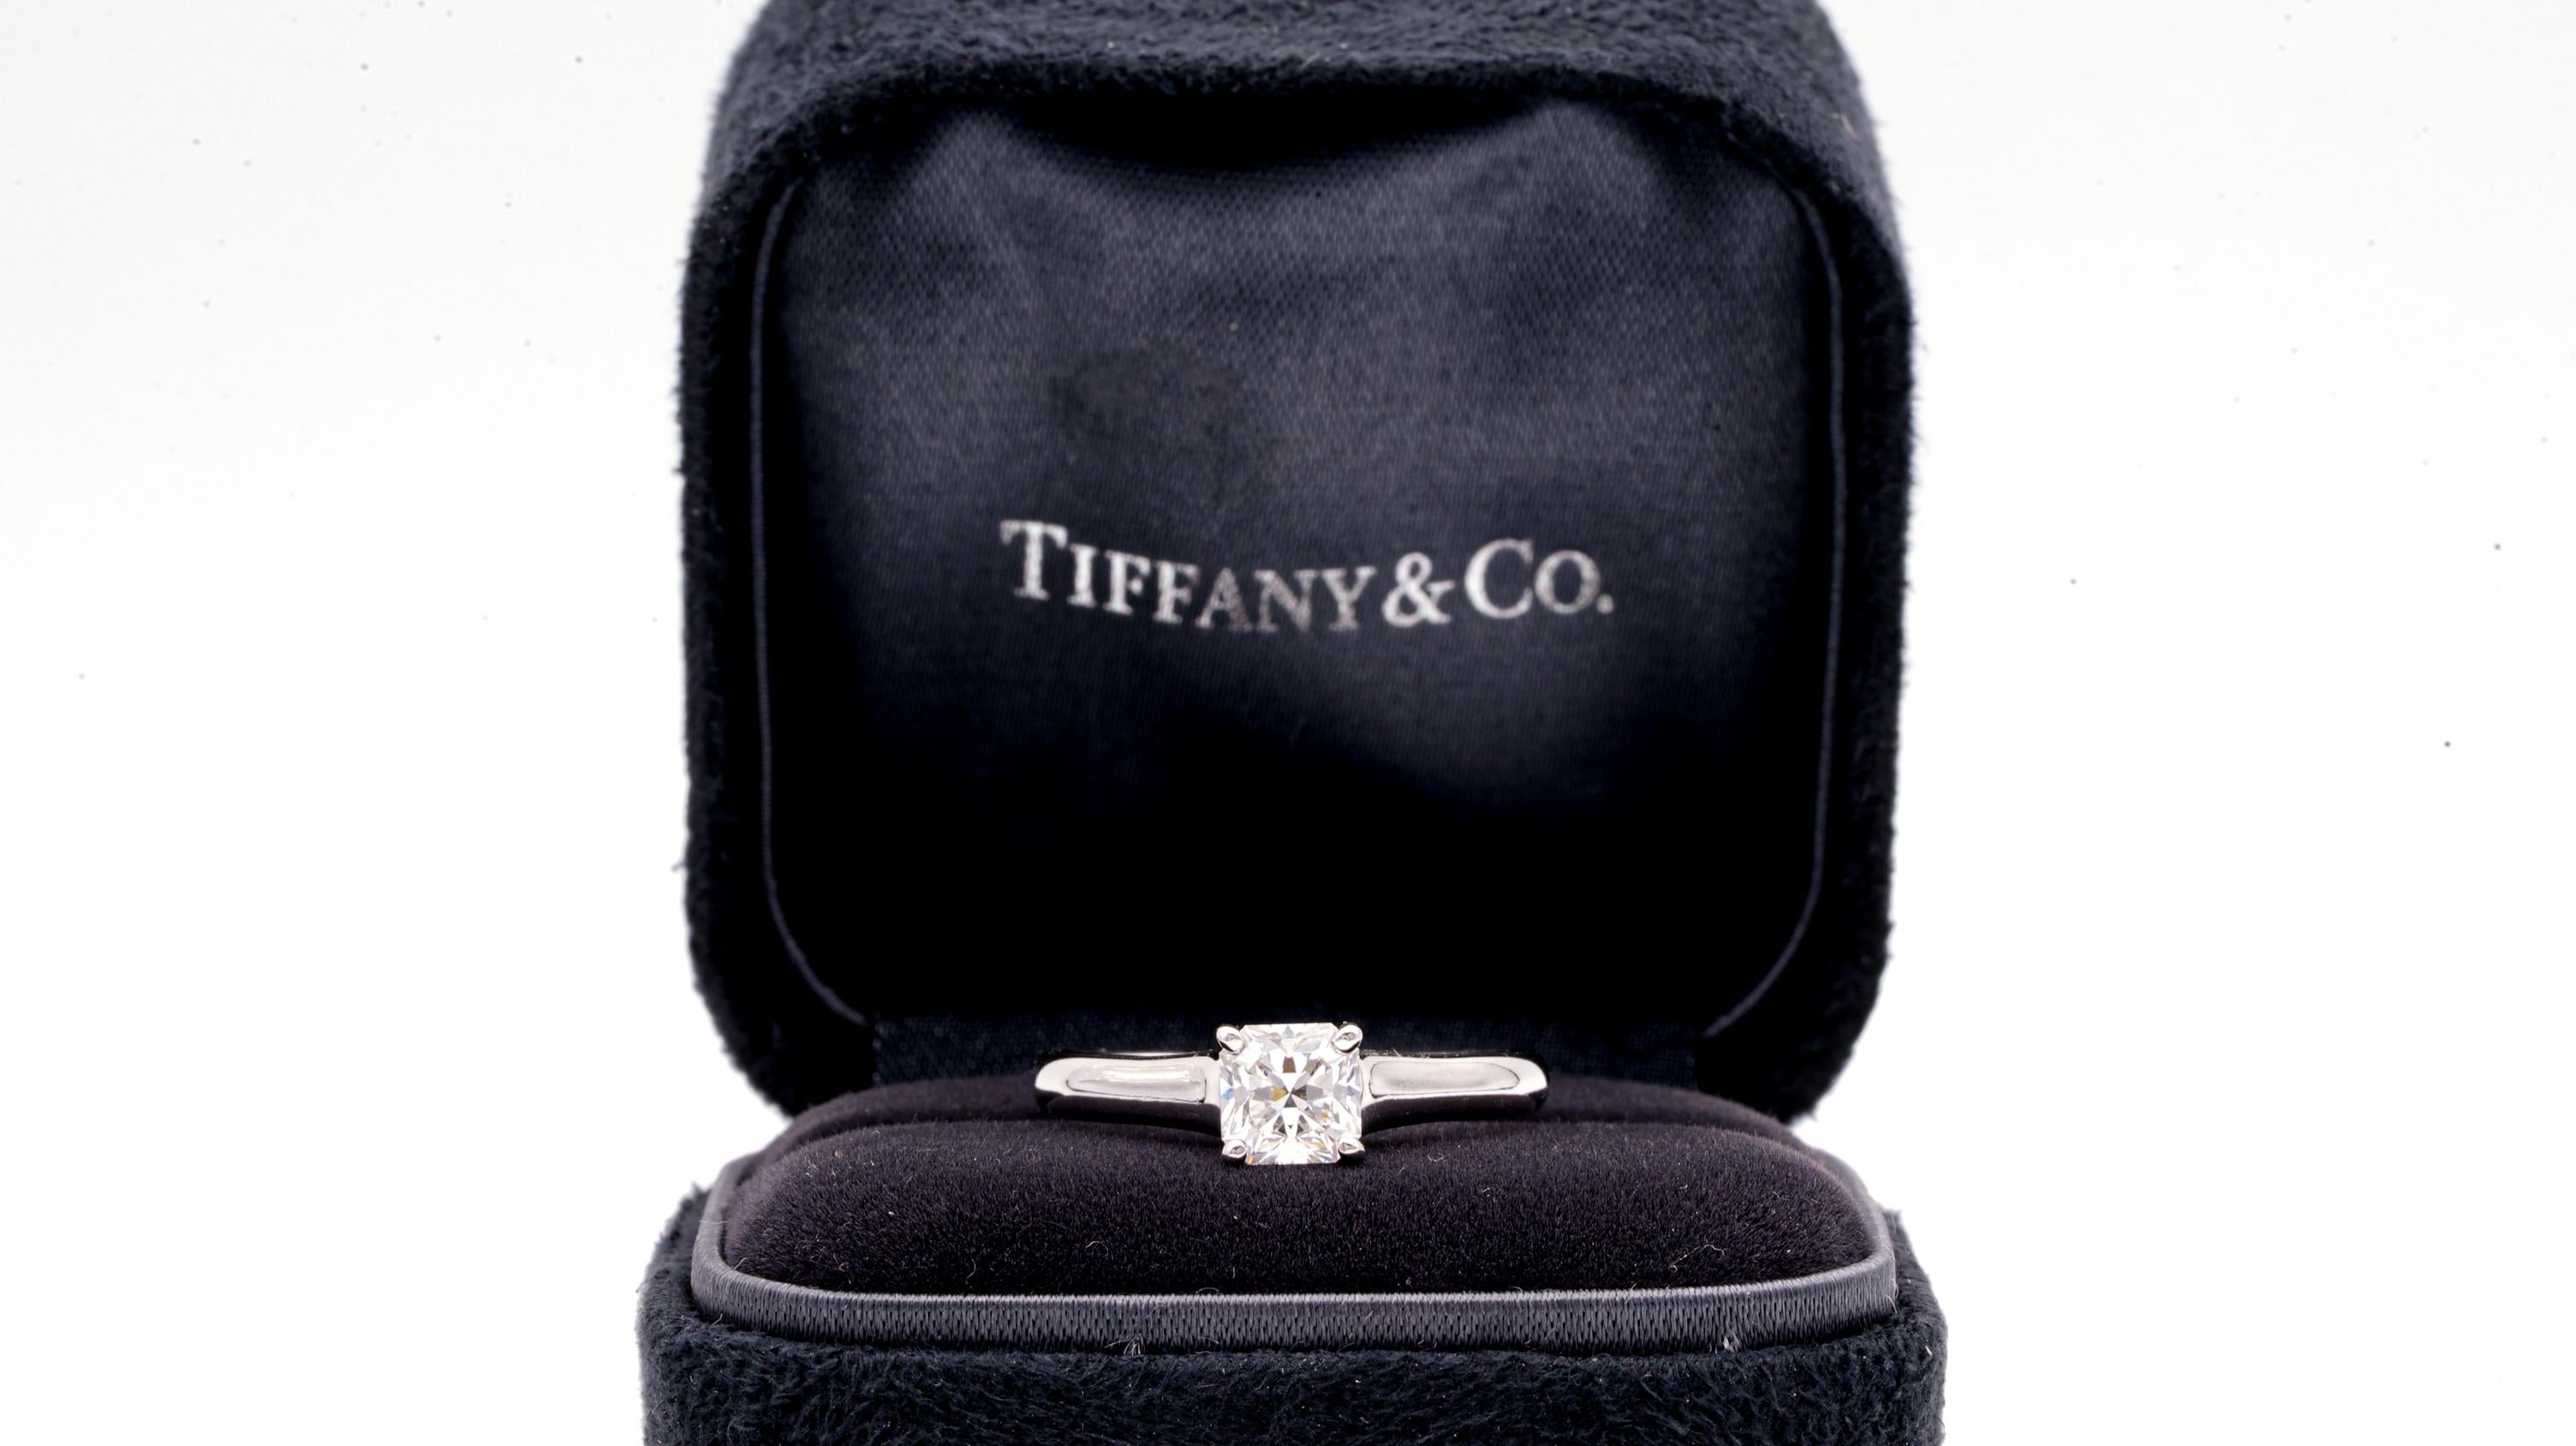 Tiffany & Co. Lucida Diamond engagement ring with 0.80 ct center , F color , VS1 clarity finely crafted in Platinum. Accompanied by Tiffany report.  Ring size is 7.
Style: Lucida Solitaire  Metal: Platinum PT950  
Total Carat Weight: 0.80 cts 